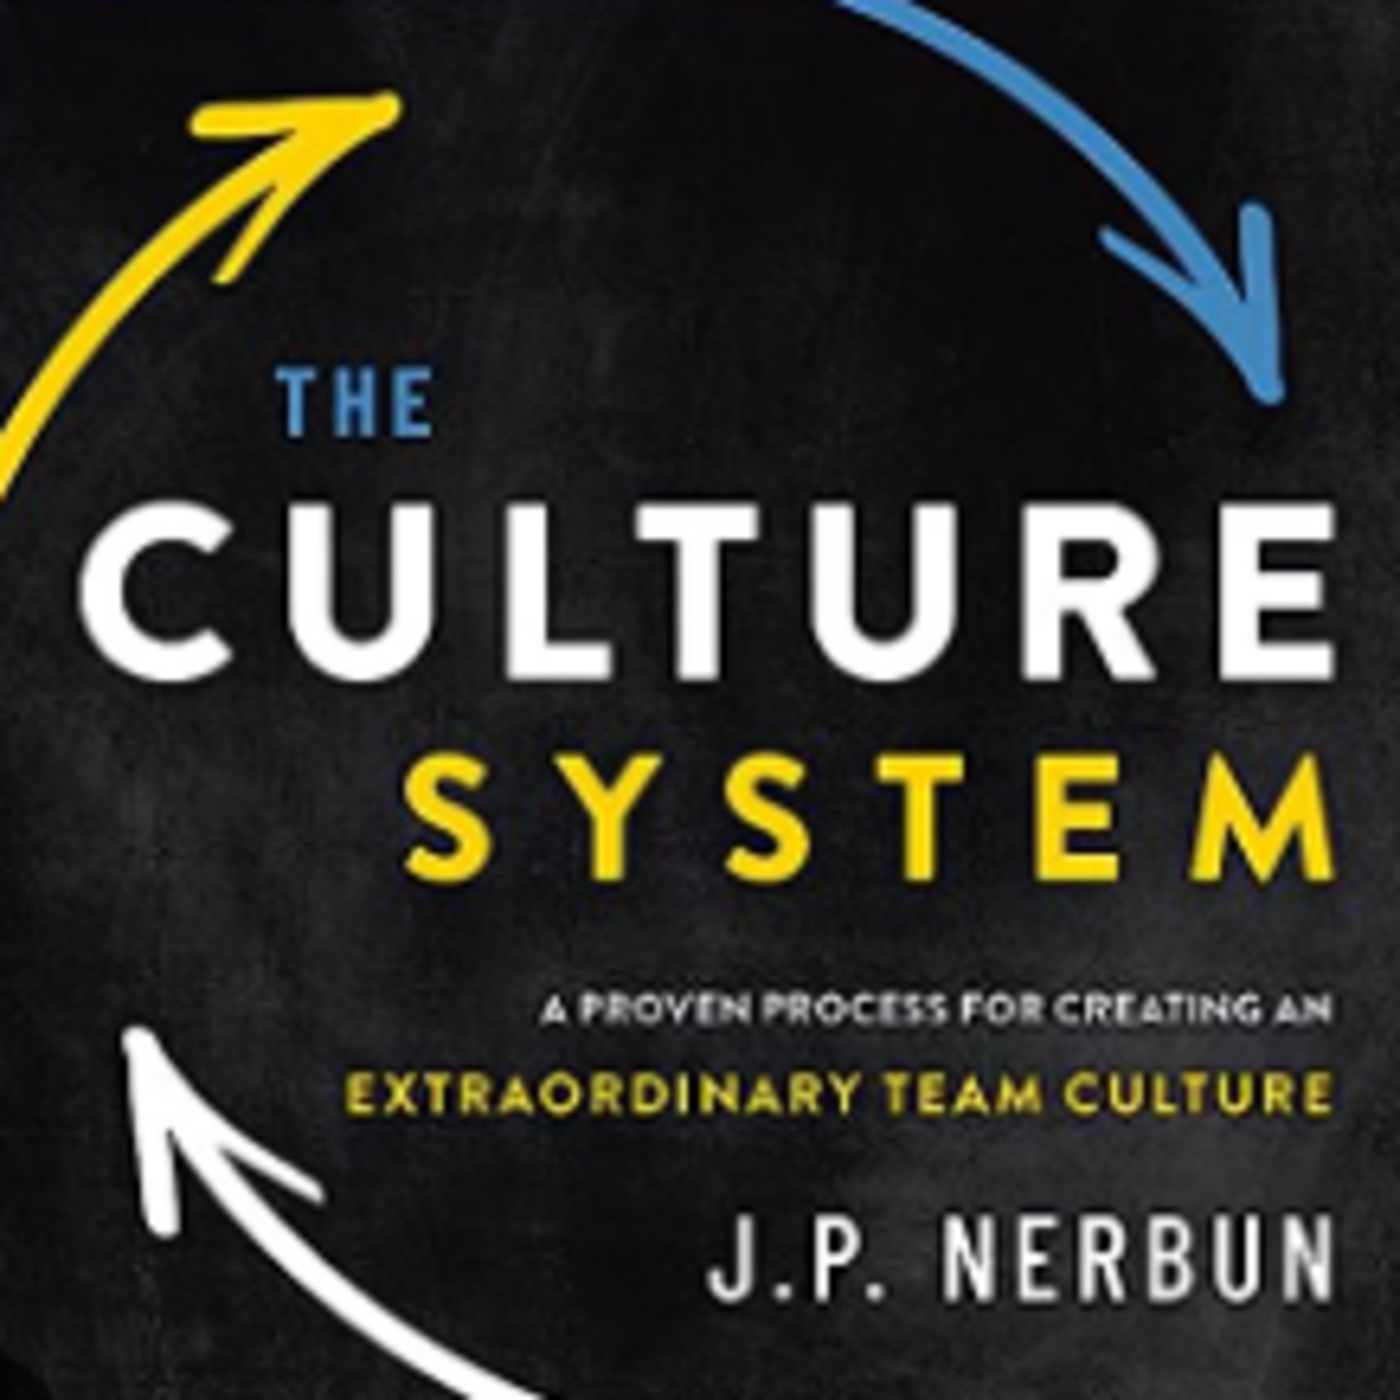 Episode 115: JP Nerbun, Ep. 115, The Culture System: A Proven Process For Creating An Extraordinary Team Culture